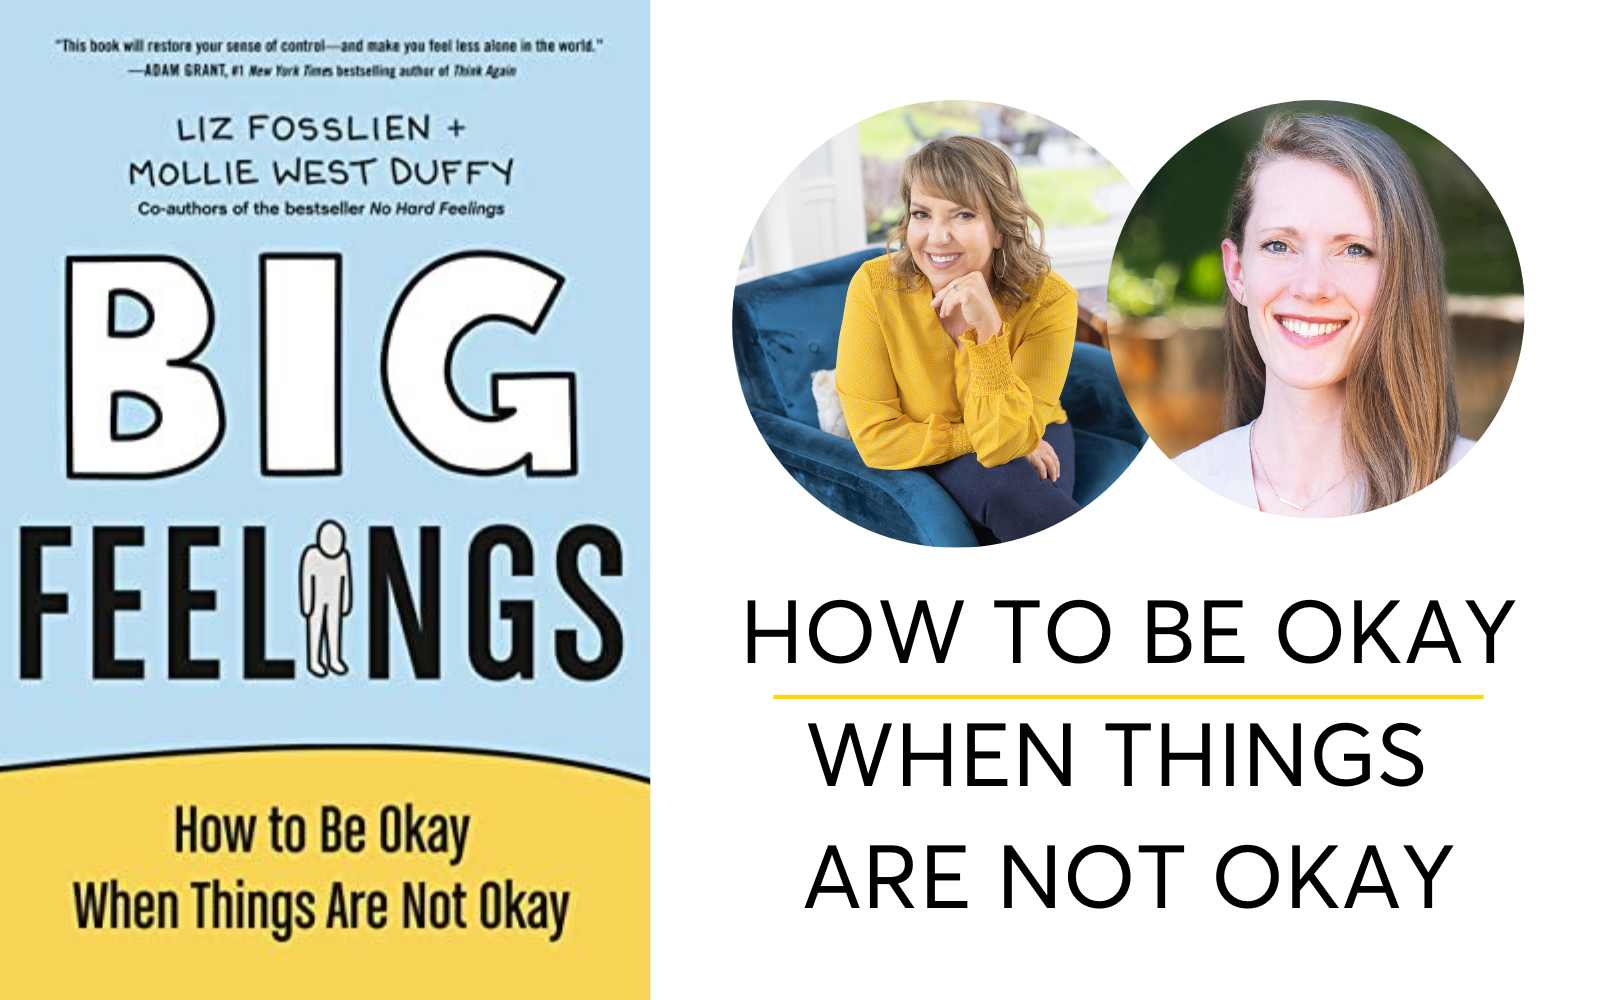 How To Be Okay When Things Are Not Okay